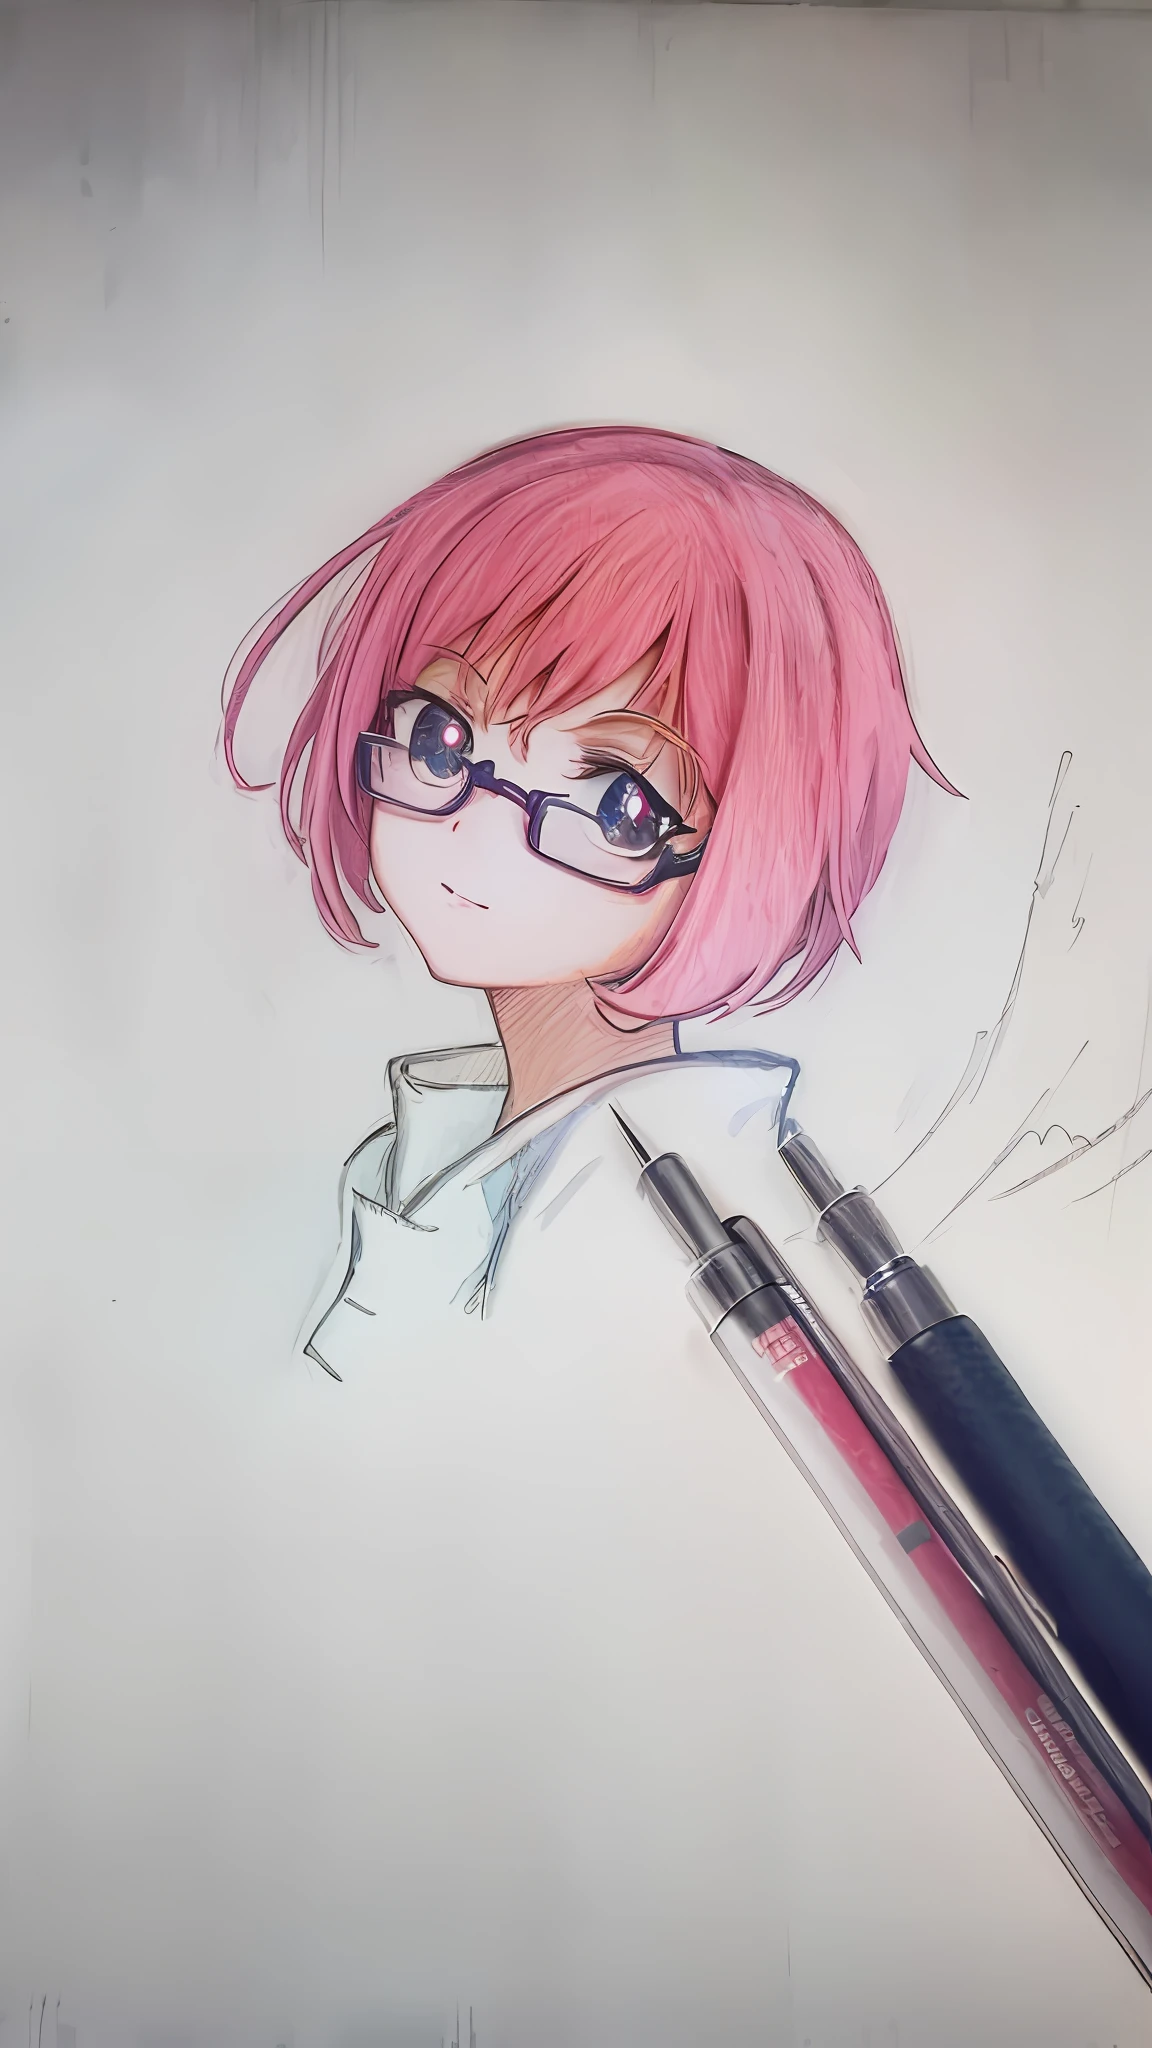 drawing of a woman with glasses and a pink hair with a pen, manga pen, anime sketch, anime style portrait, anime style drawing, semirealistic anime style, in an anime style, pencil style, !pencil, flat anime style shading, Realistic anime art style, an anime drawing, clean detailed anime style, 2 d anime style, anime realism style, pen draw